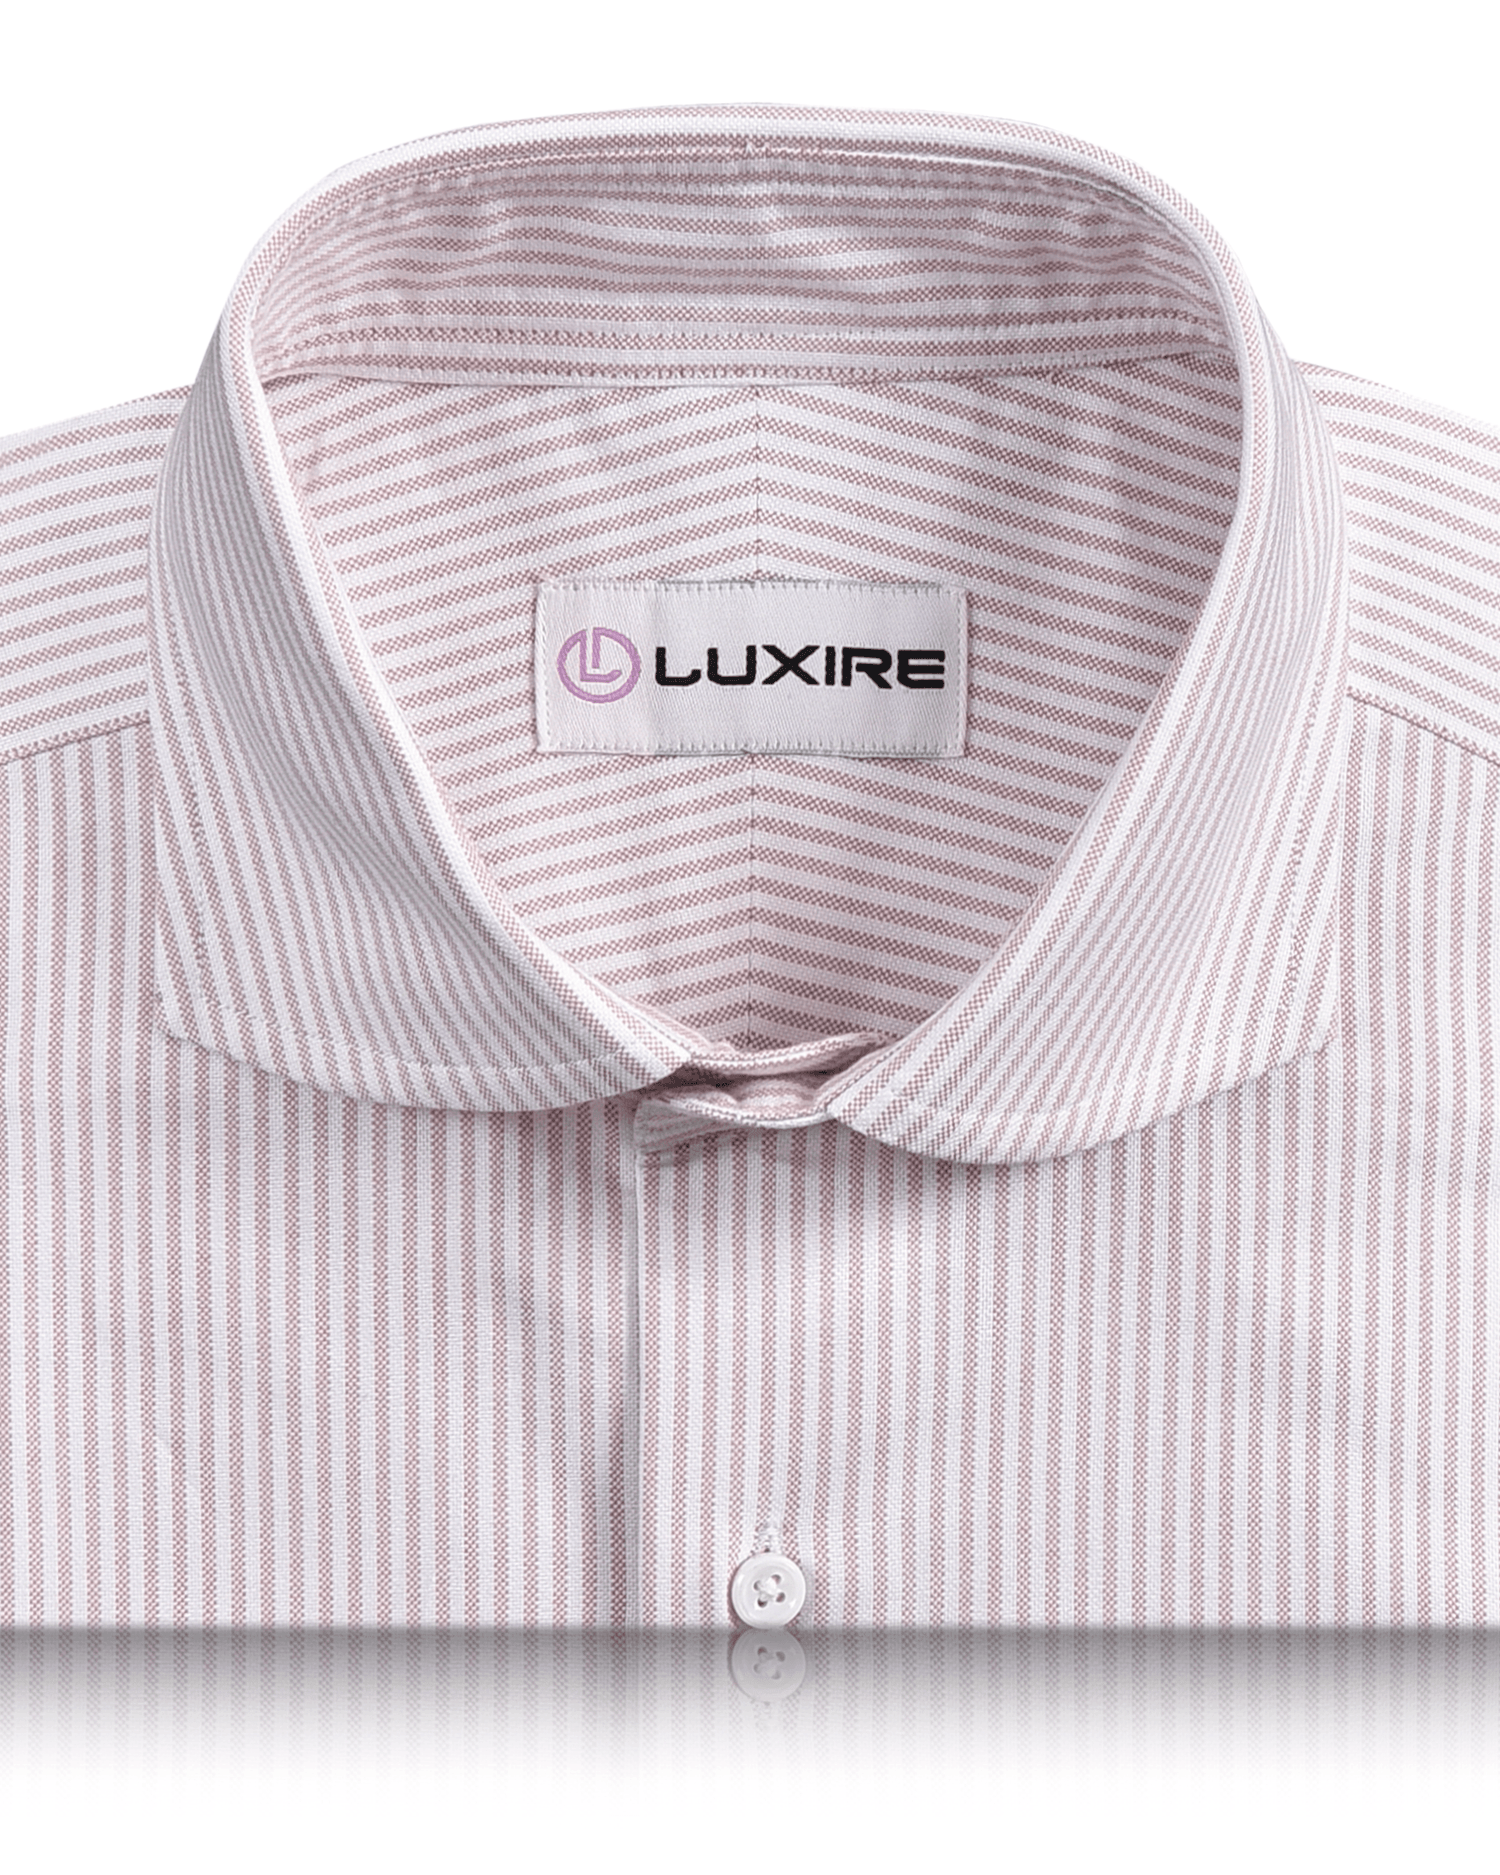 Collar of the custom oxford shirt for men by Luxire in white with pink university stripes